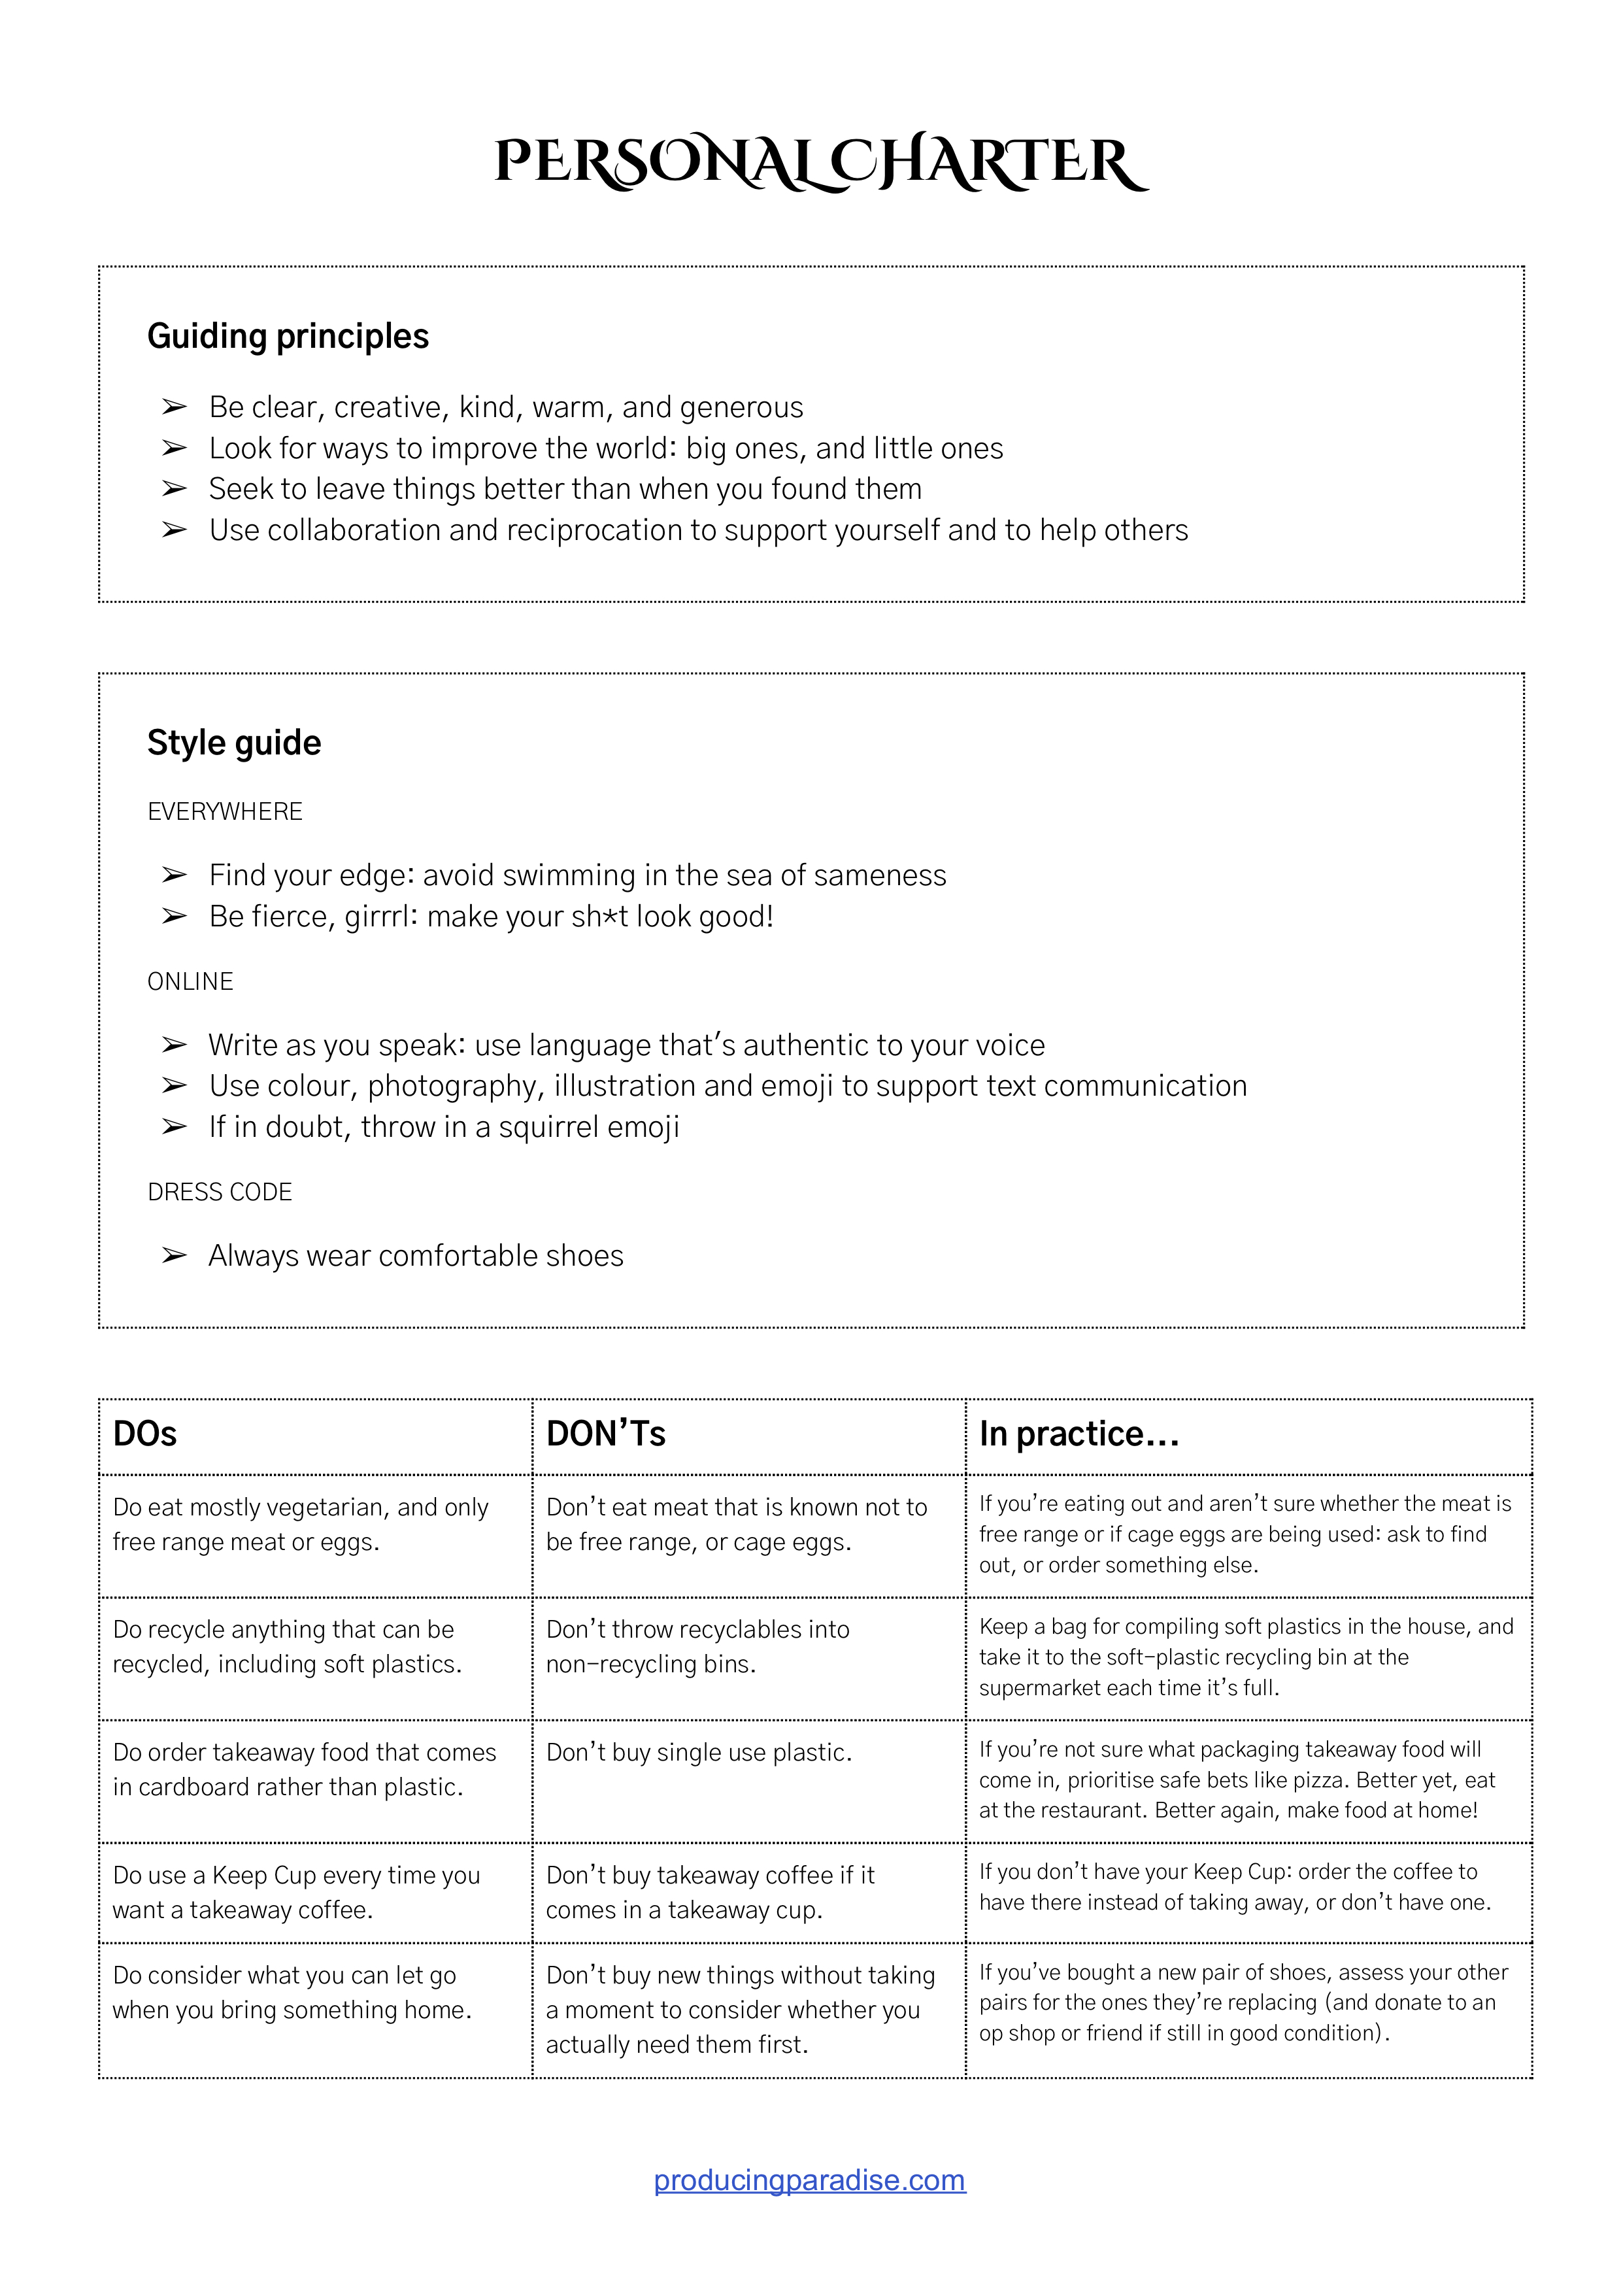 Screenshot of a document titled 'Personal Charter' filled out with guiding principles, style guide and a Dos and Don'ts section